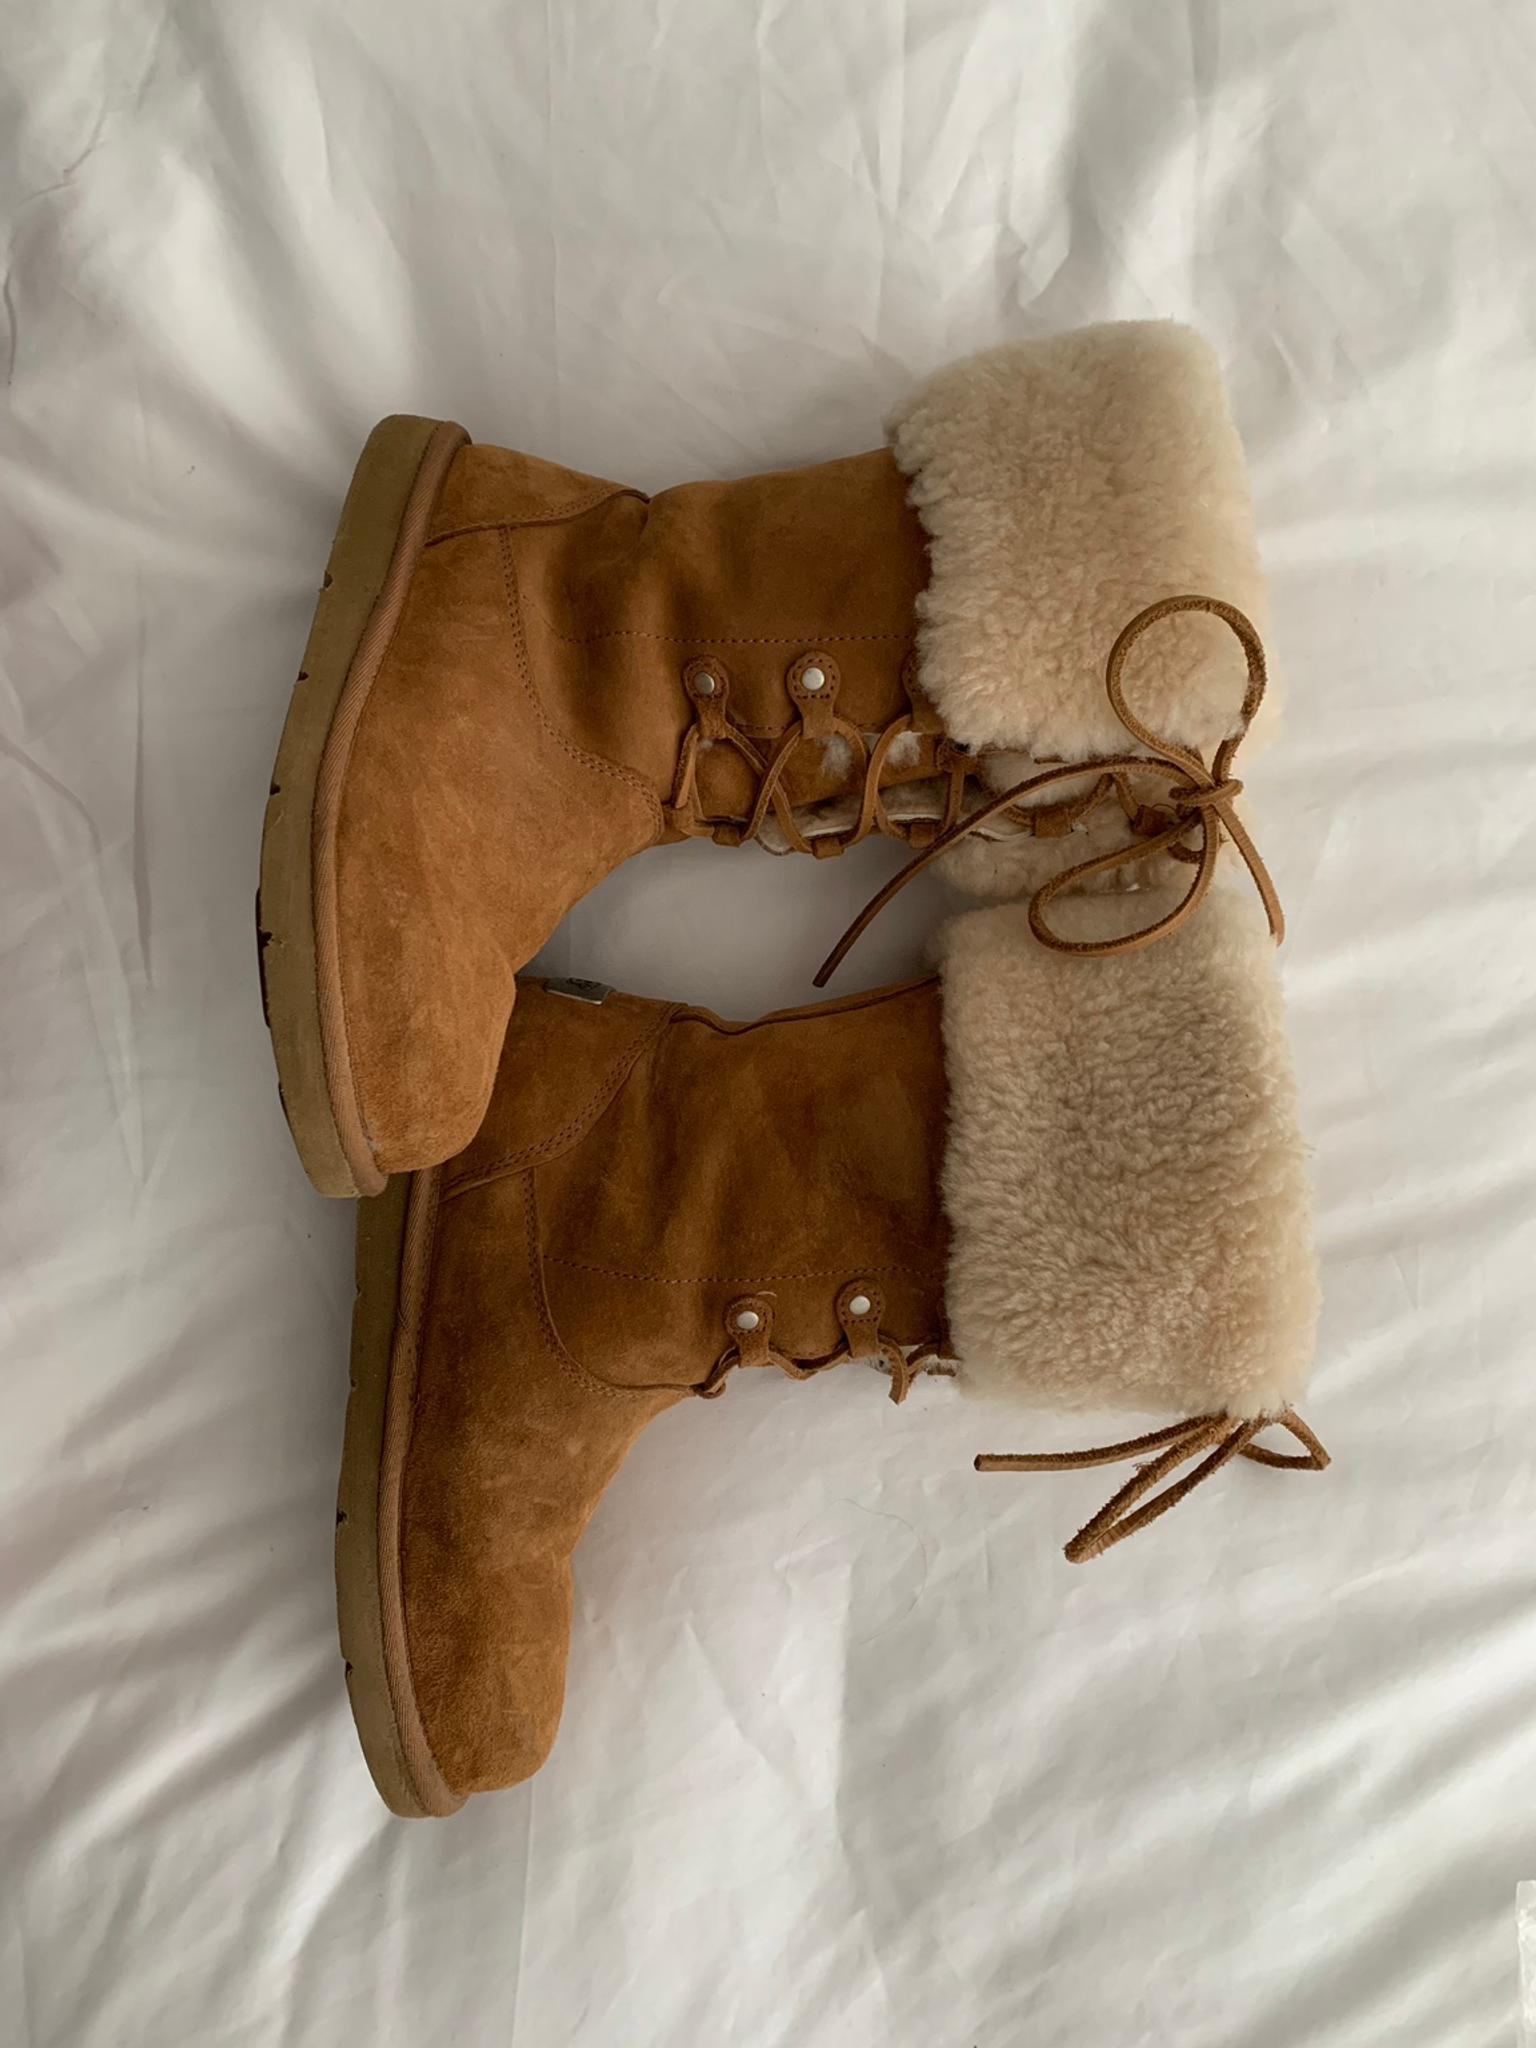 ugg boots that tie